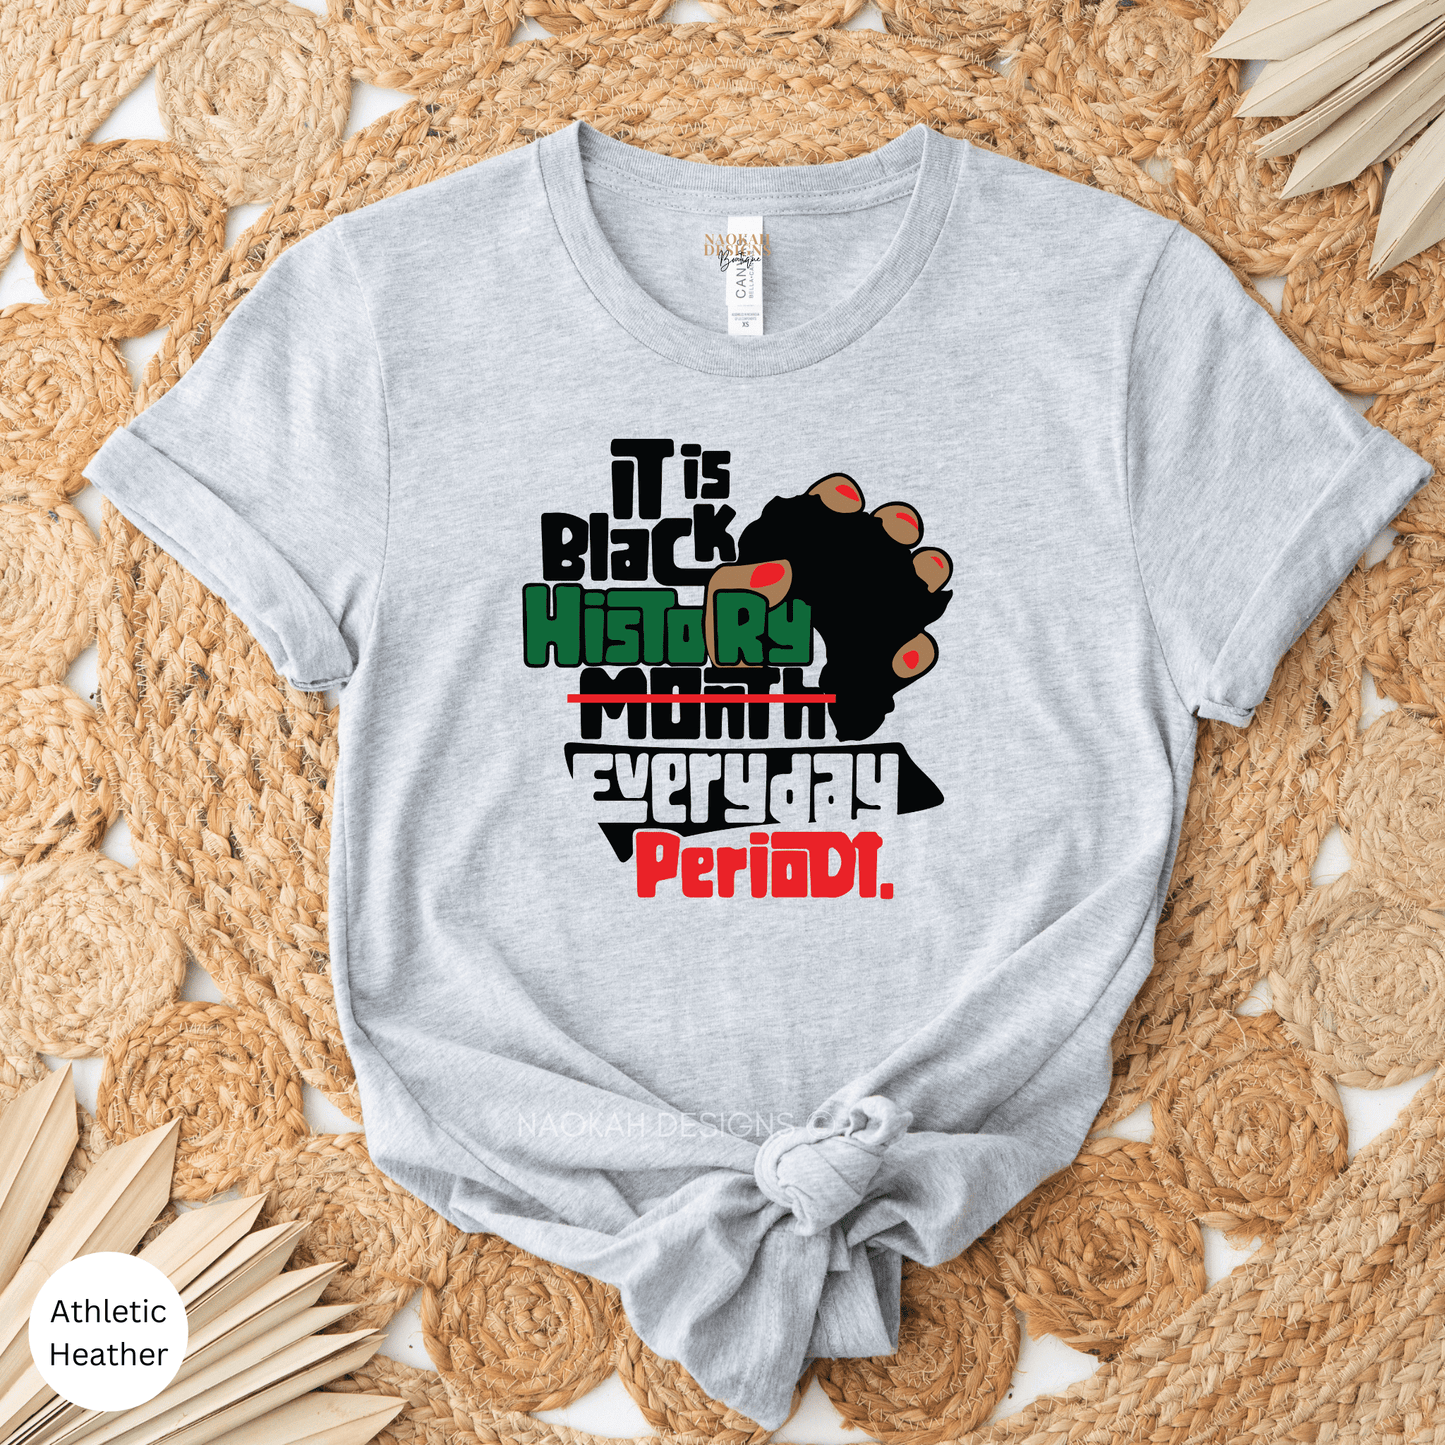 It Is Black History Everyday Period Shirt, Black Lives Matter Shirts, Black History Months, Black History is Strong Shirt, BLM Shirt